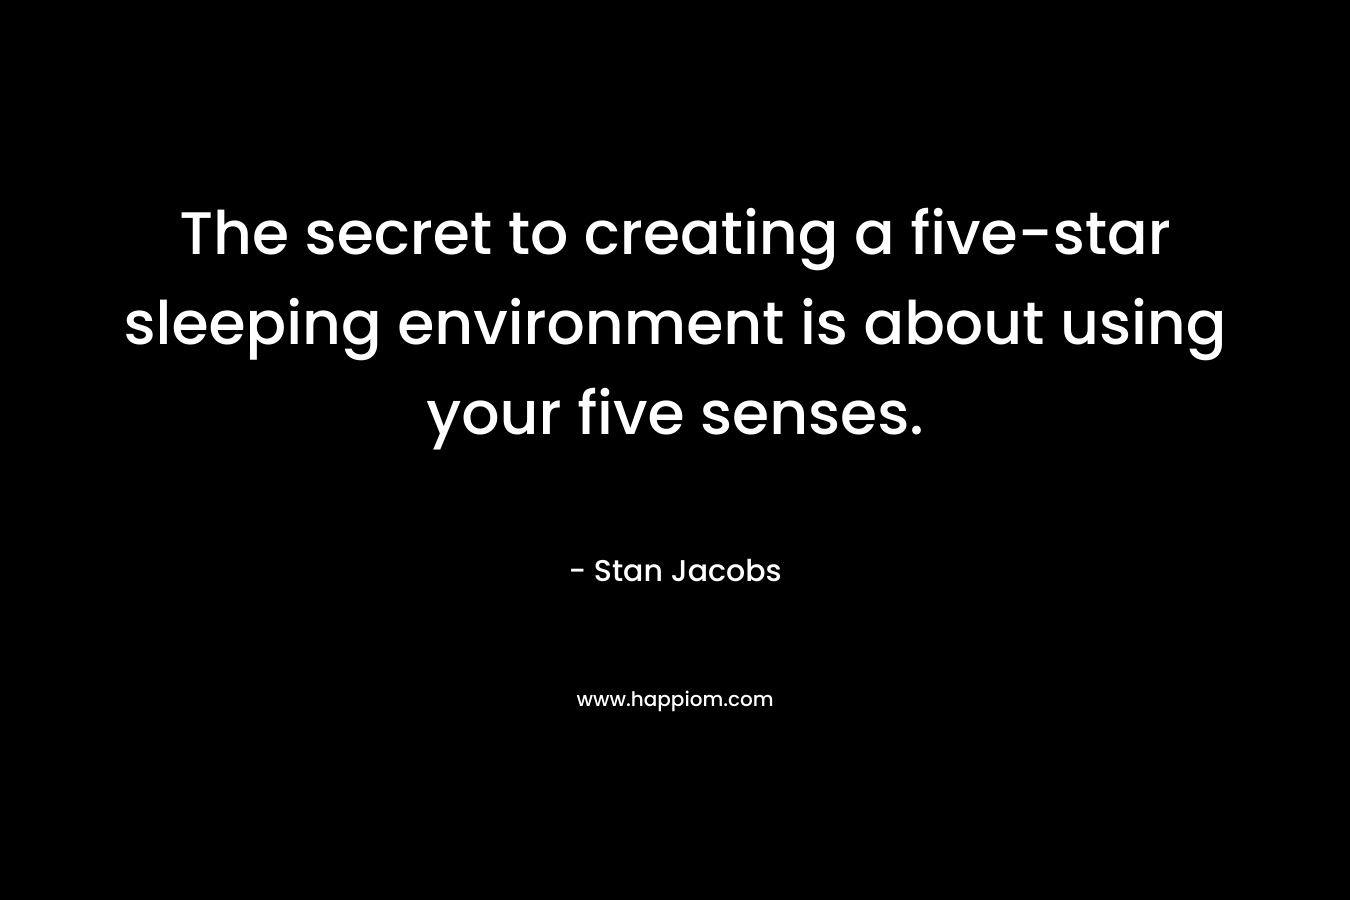 The secret to creating a five-star sleeping environment is about using your five senses.